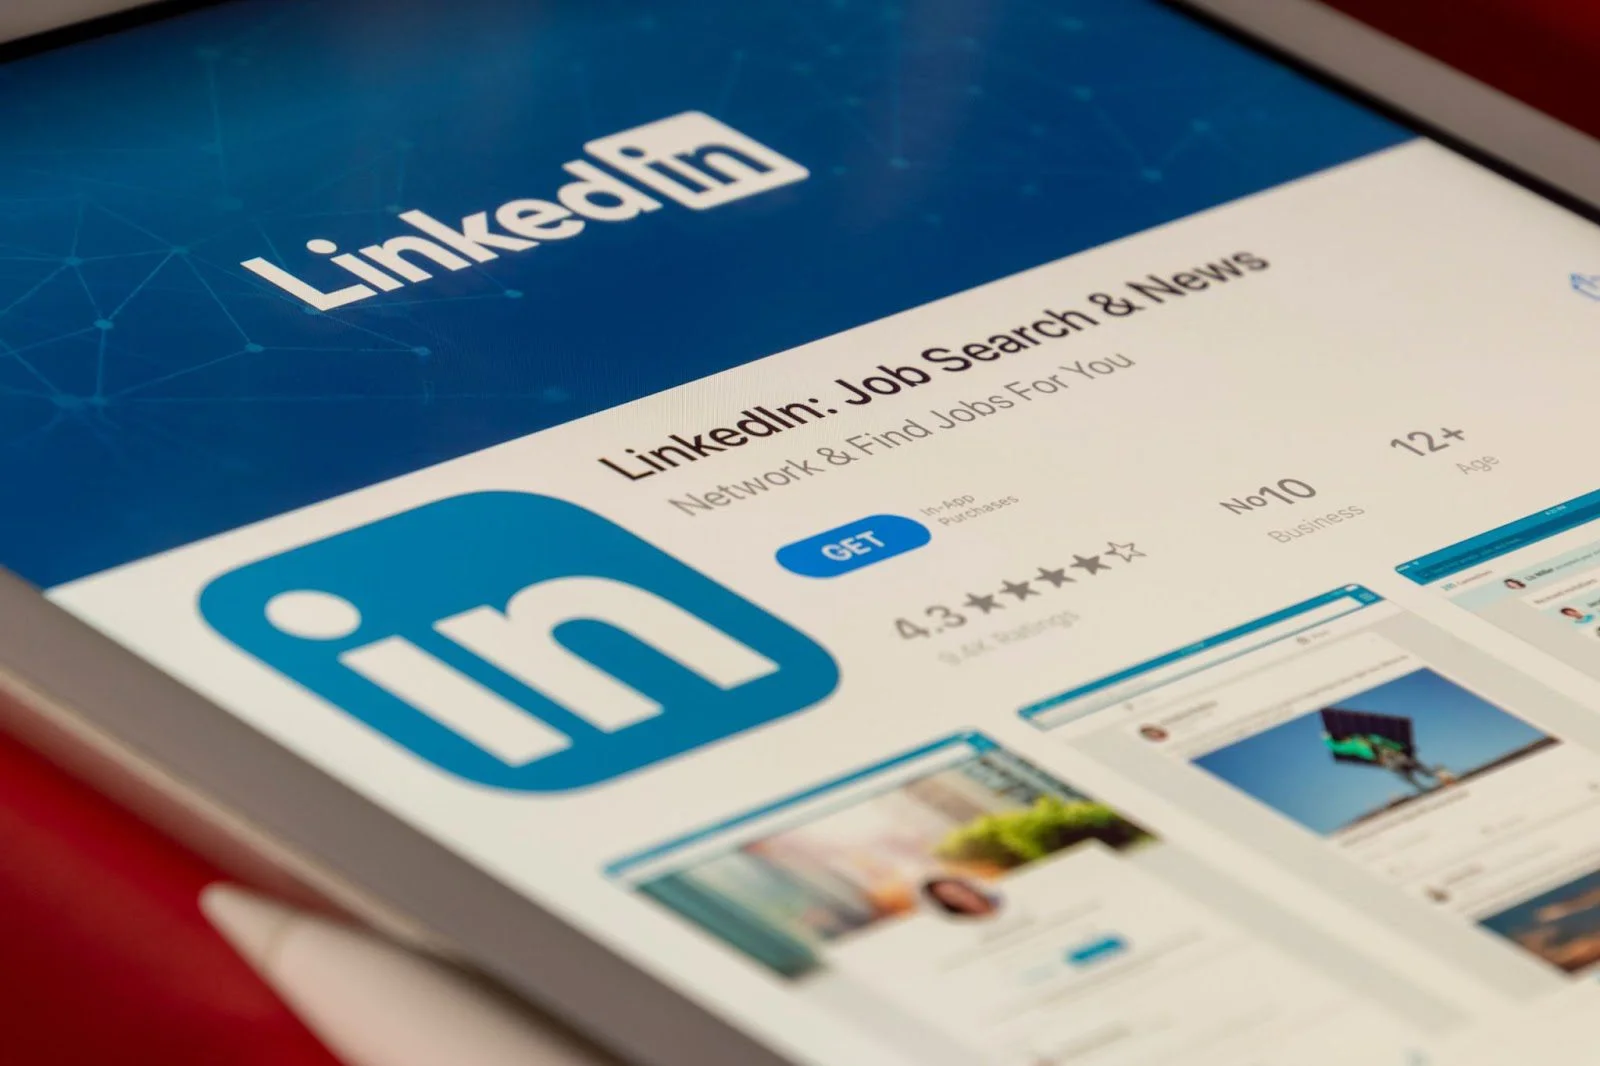 How can I schedule a post on Linkedin